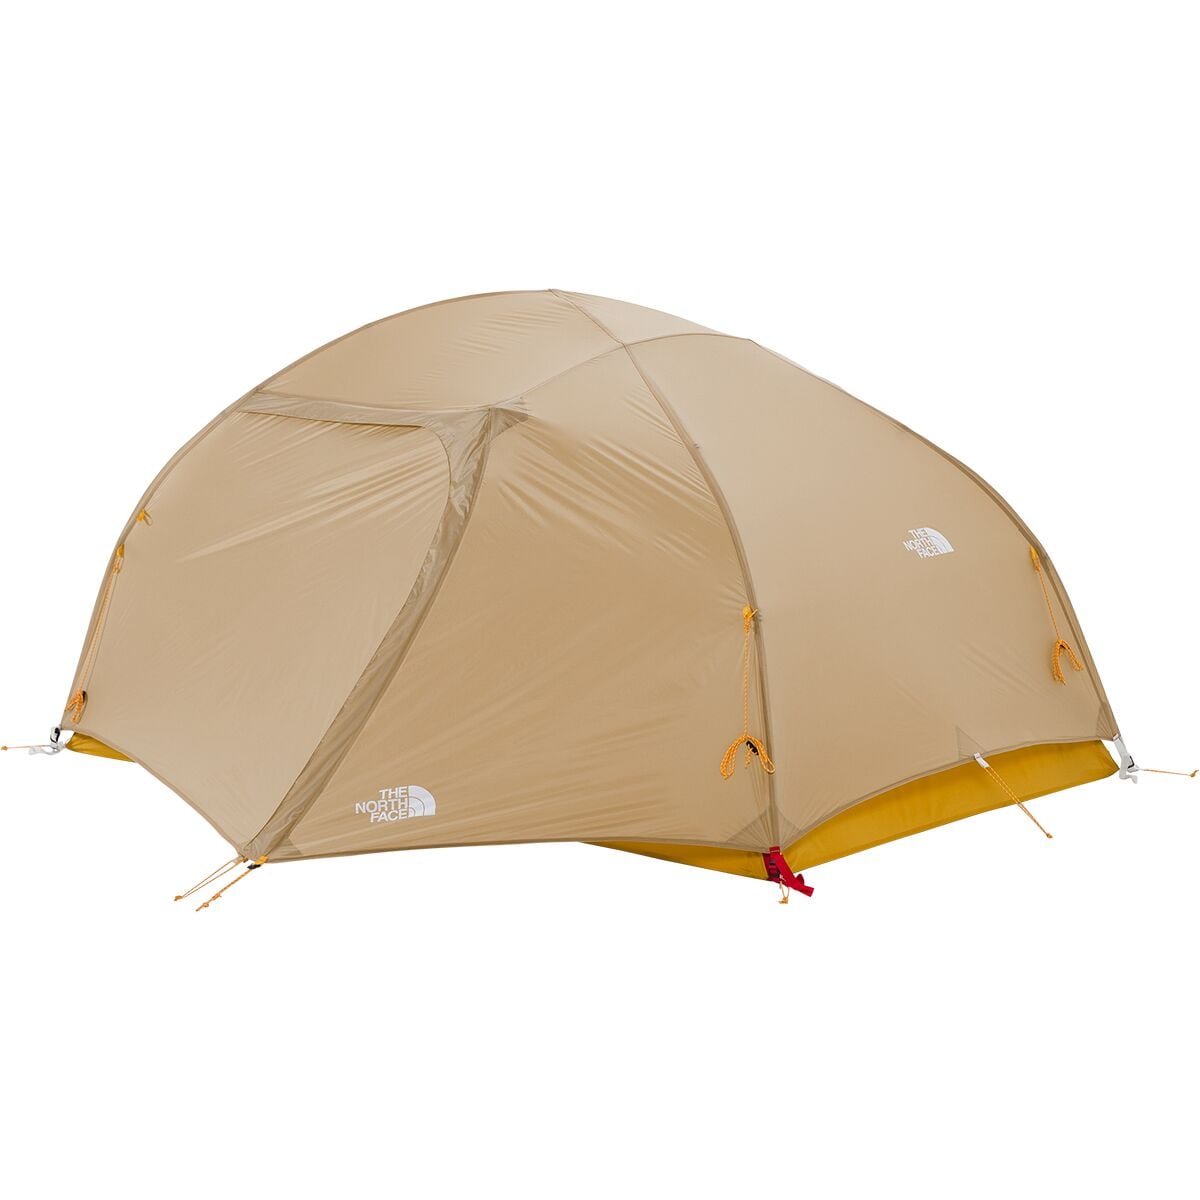 The North Face Trail Lite Tent: 2 Person 3 Season   Hike & Camp